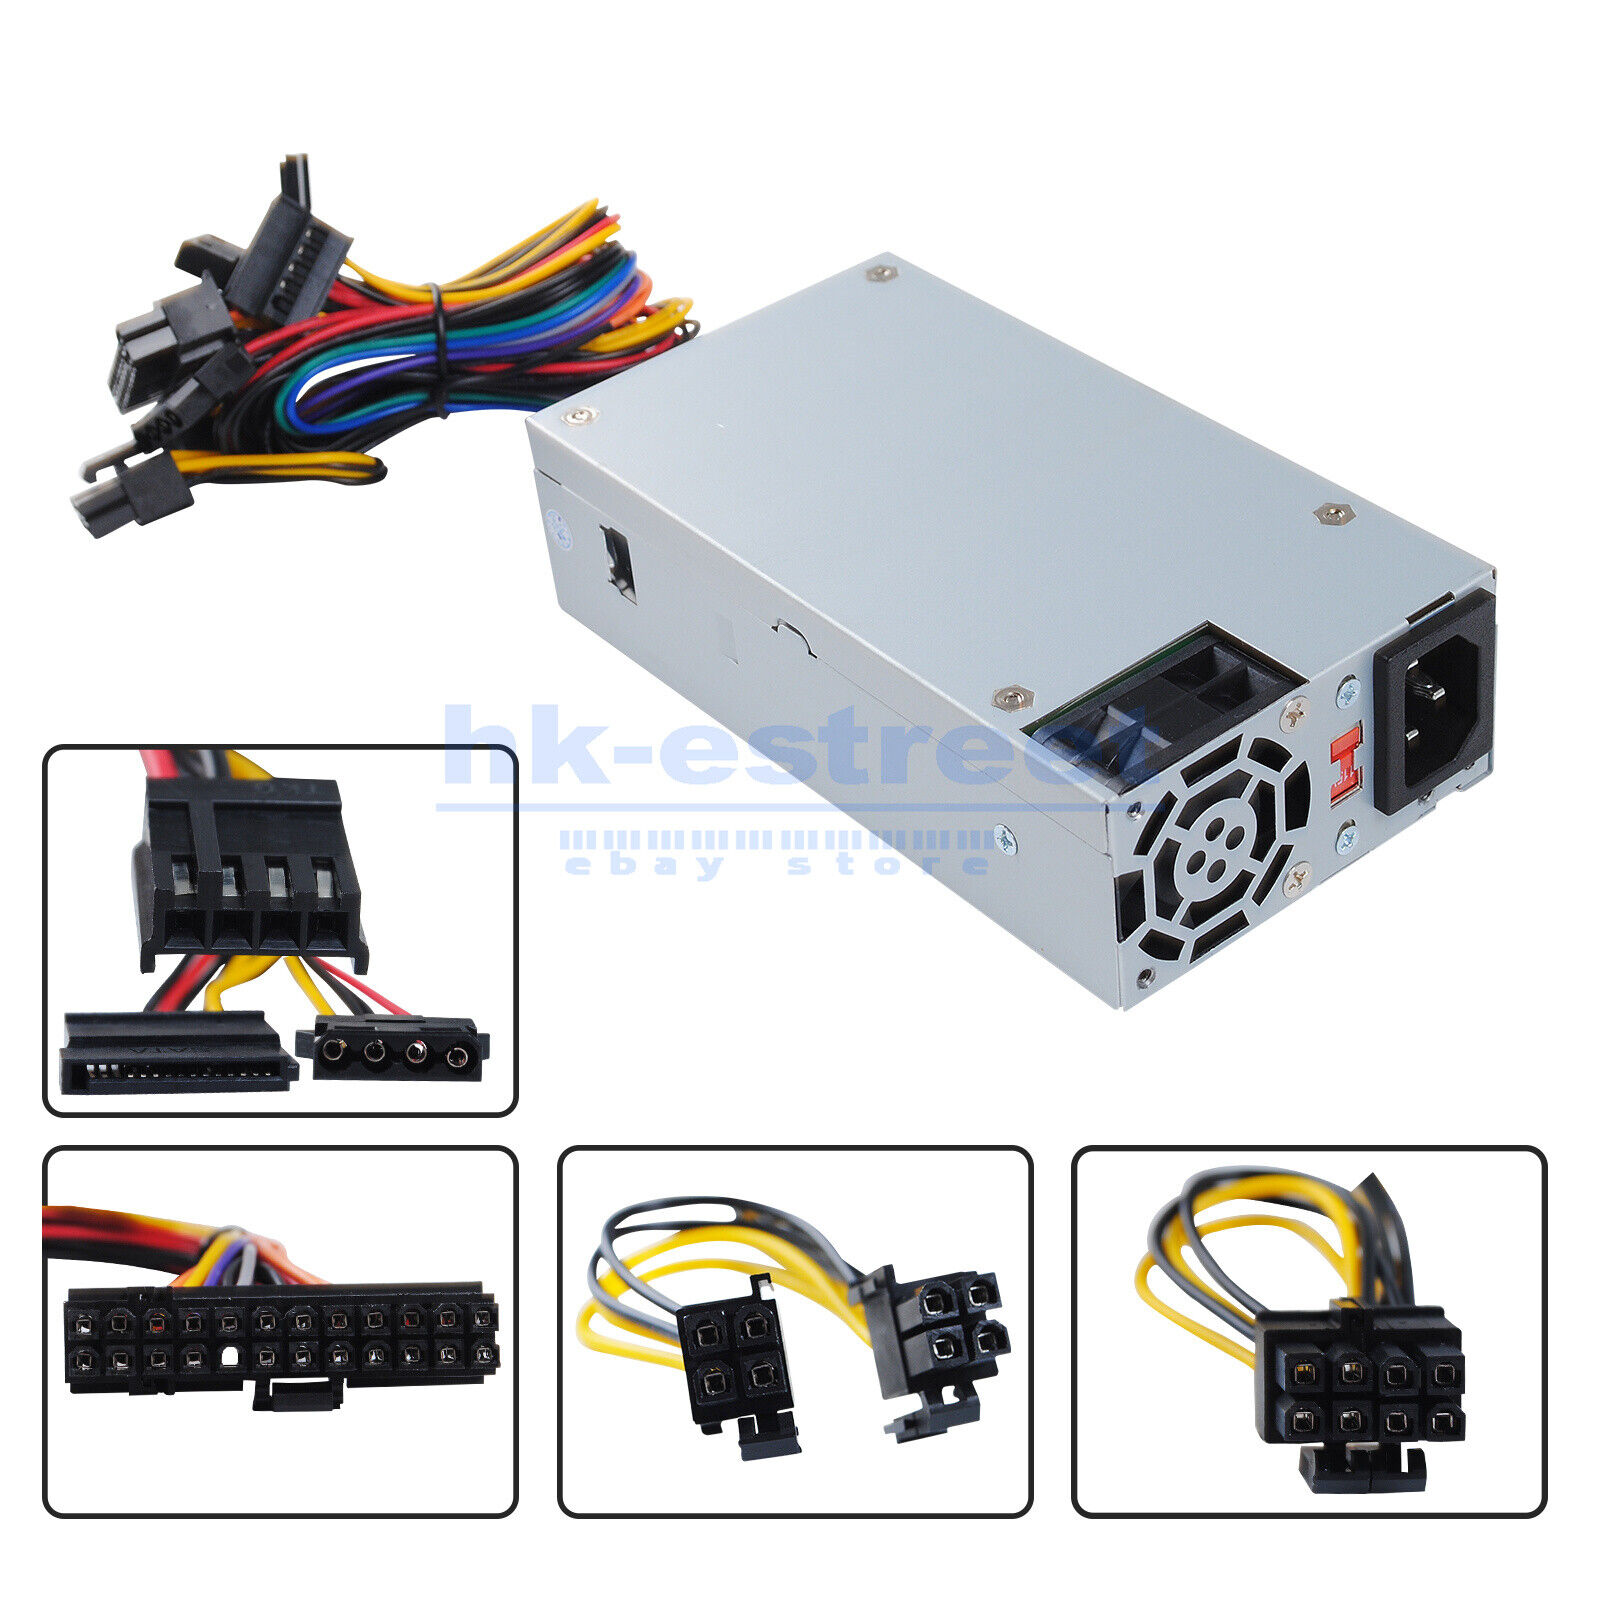 270W Power Supply AC 100-240V FSP270-60LE 1U Power For NAS Server, small chassis